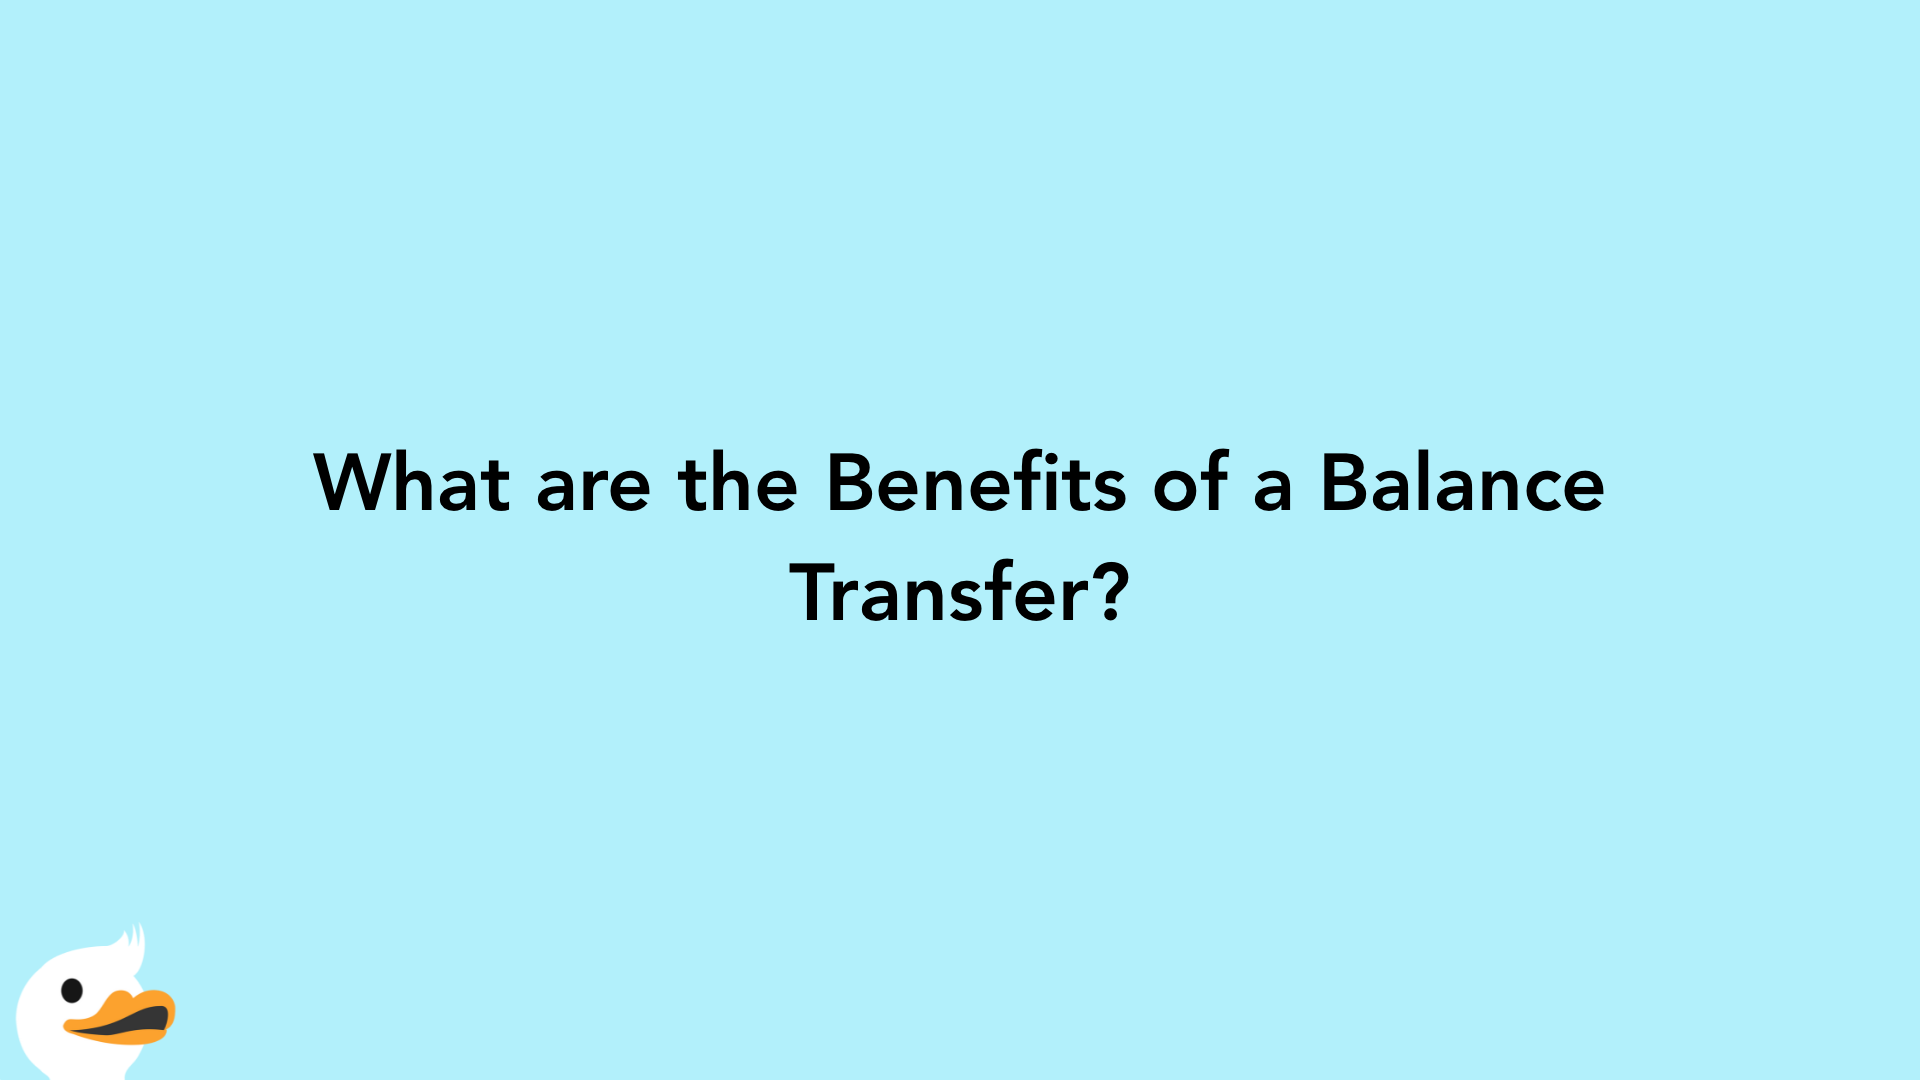 What are the Benefits of a Balance Transfer?